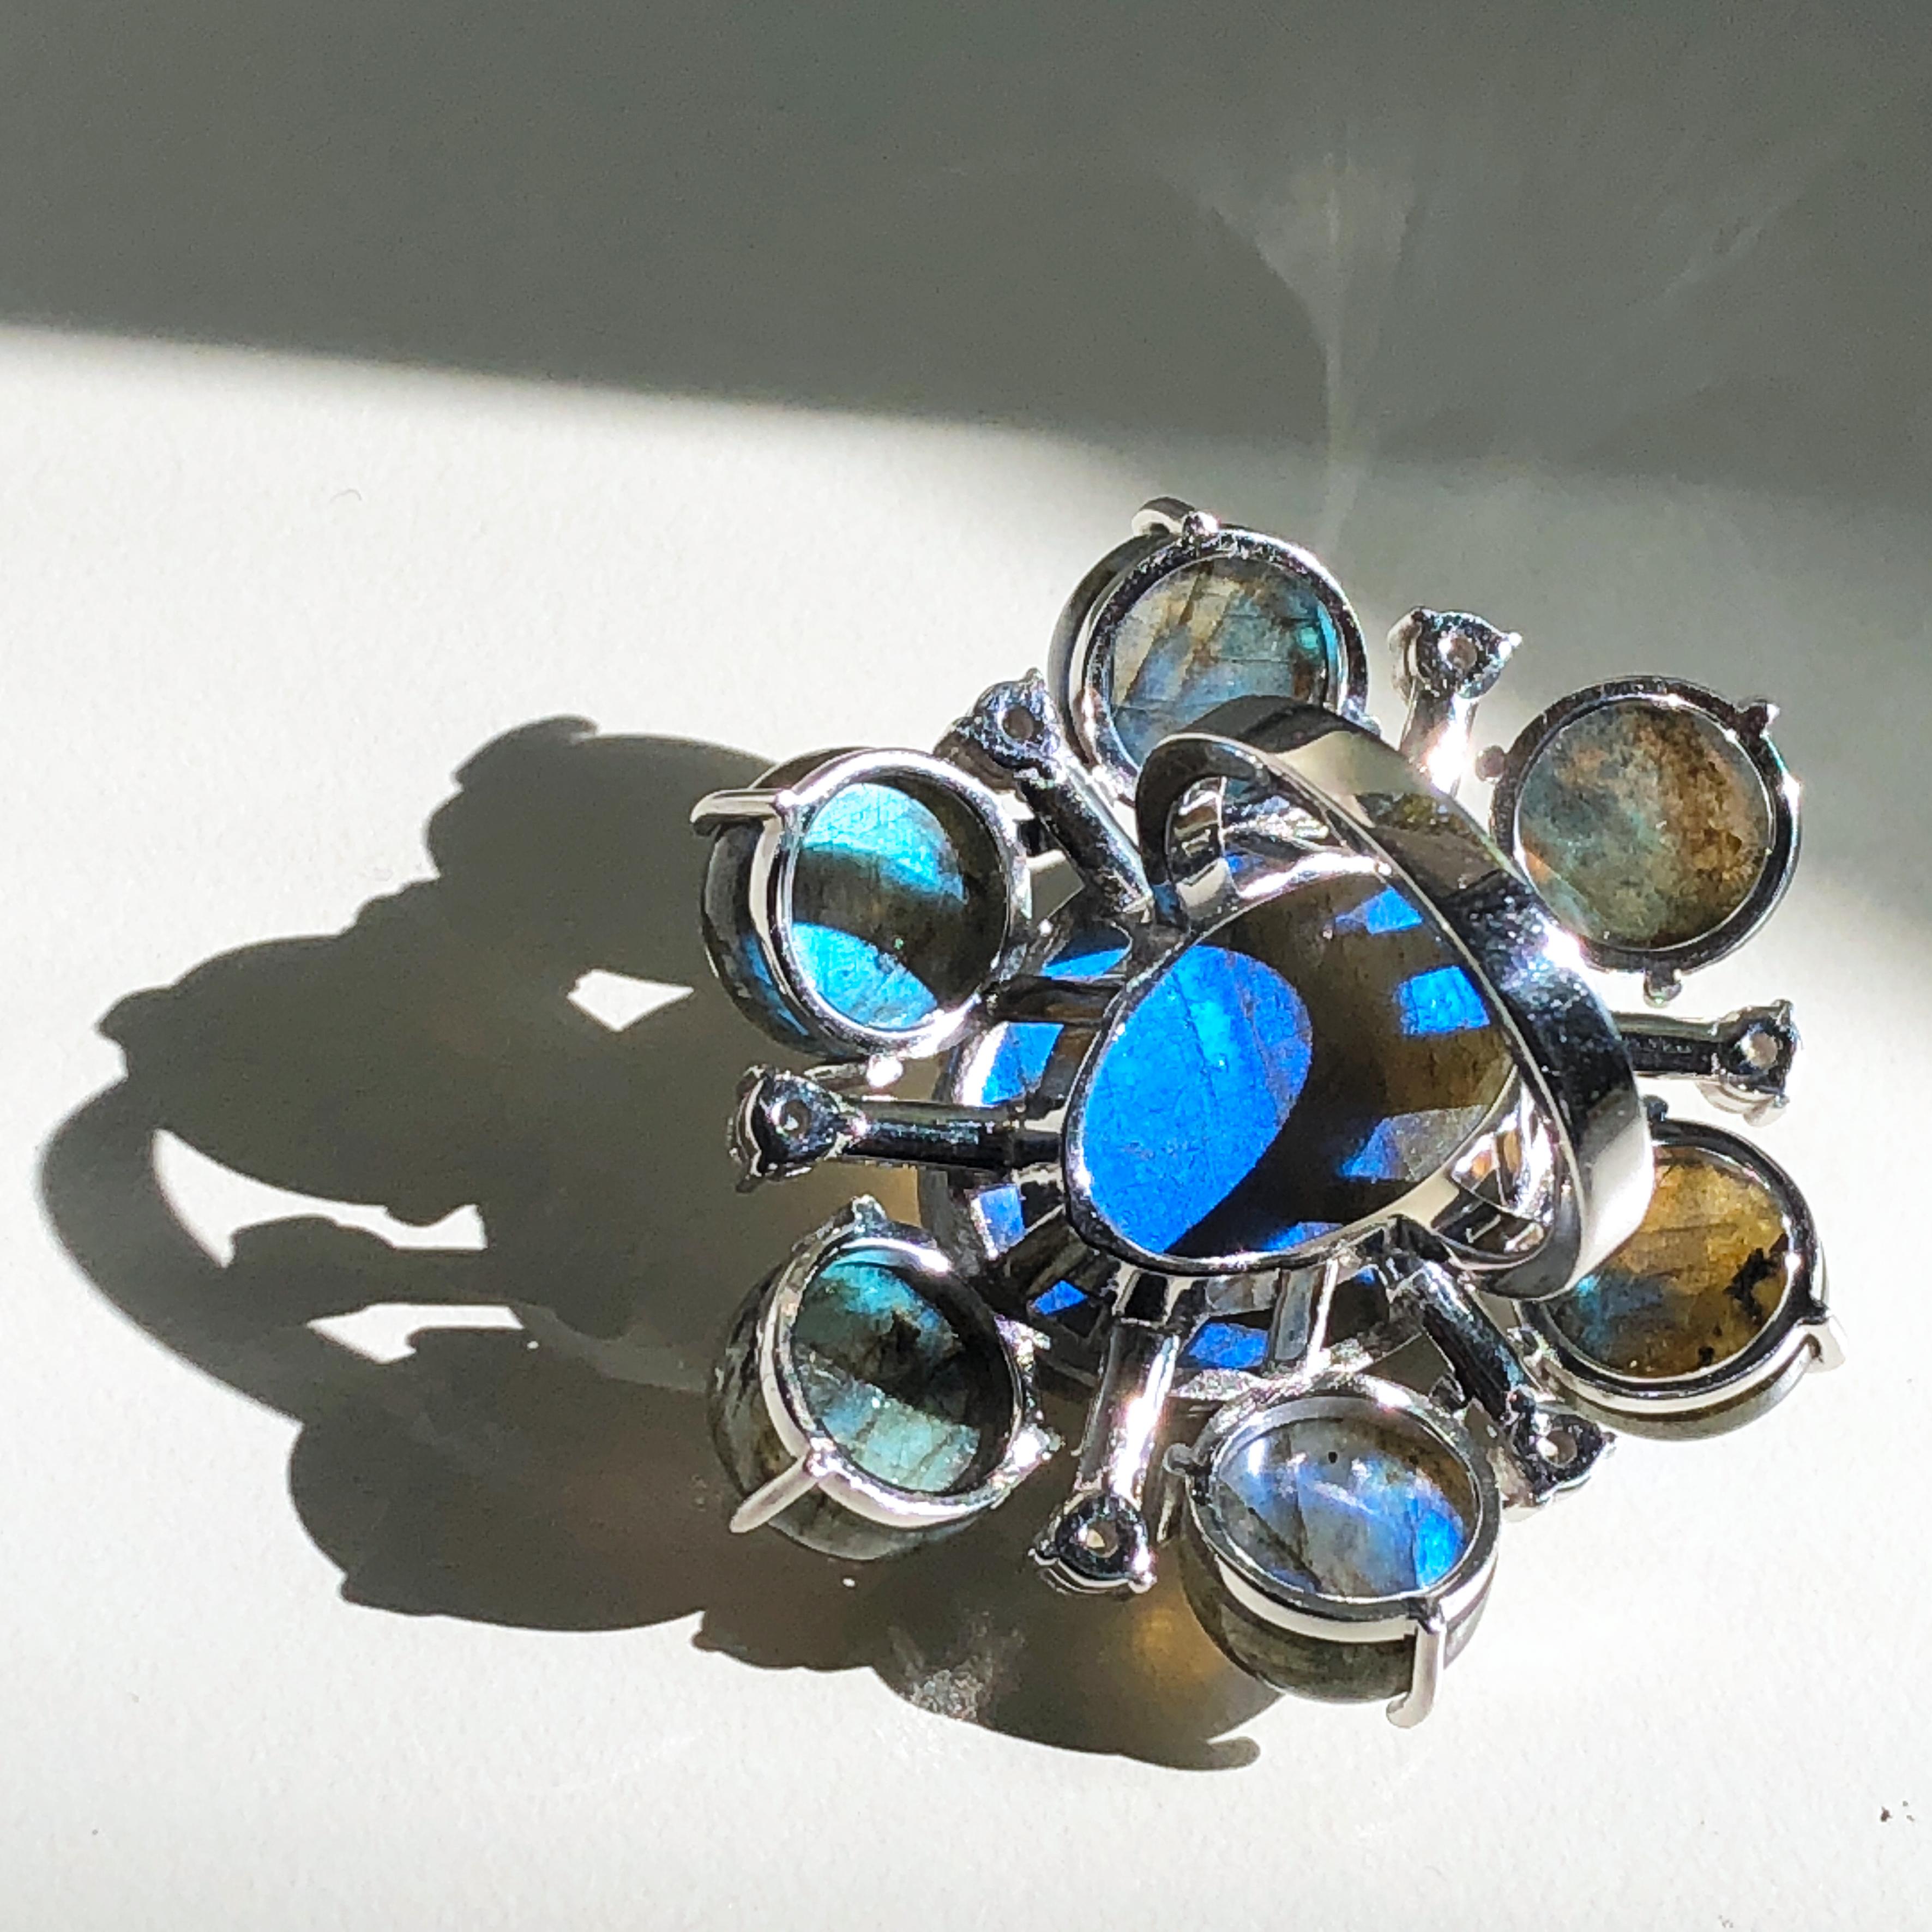 One-of-a-Kind 55.20 Carat Labradorite White Diamond Peacock Blue Cocktail Ring 2